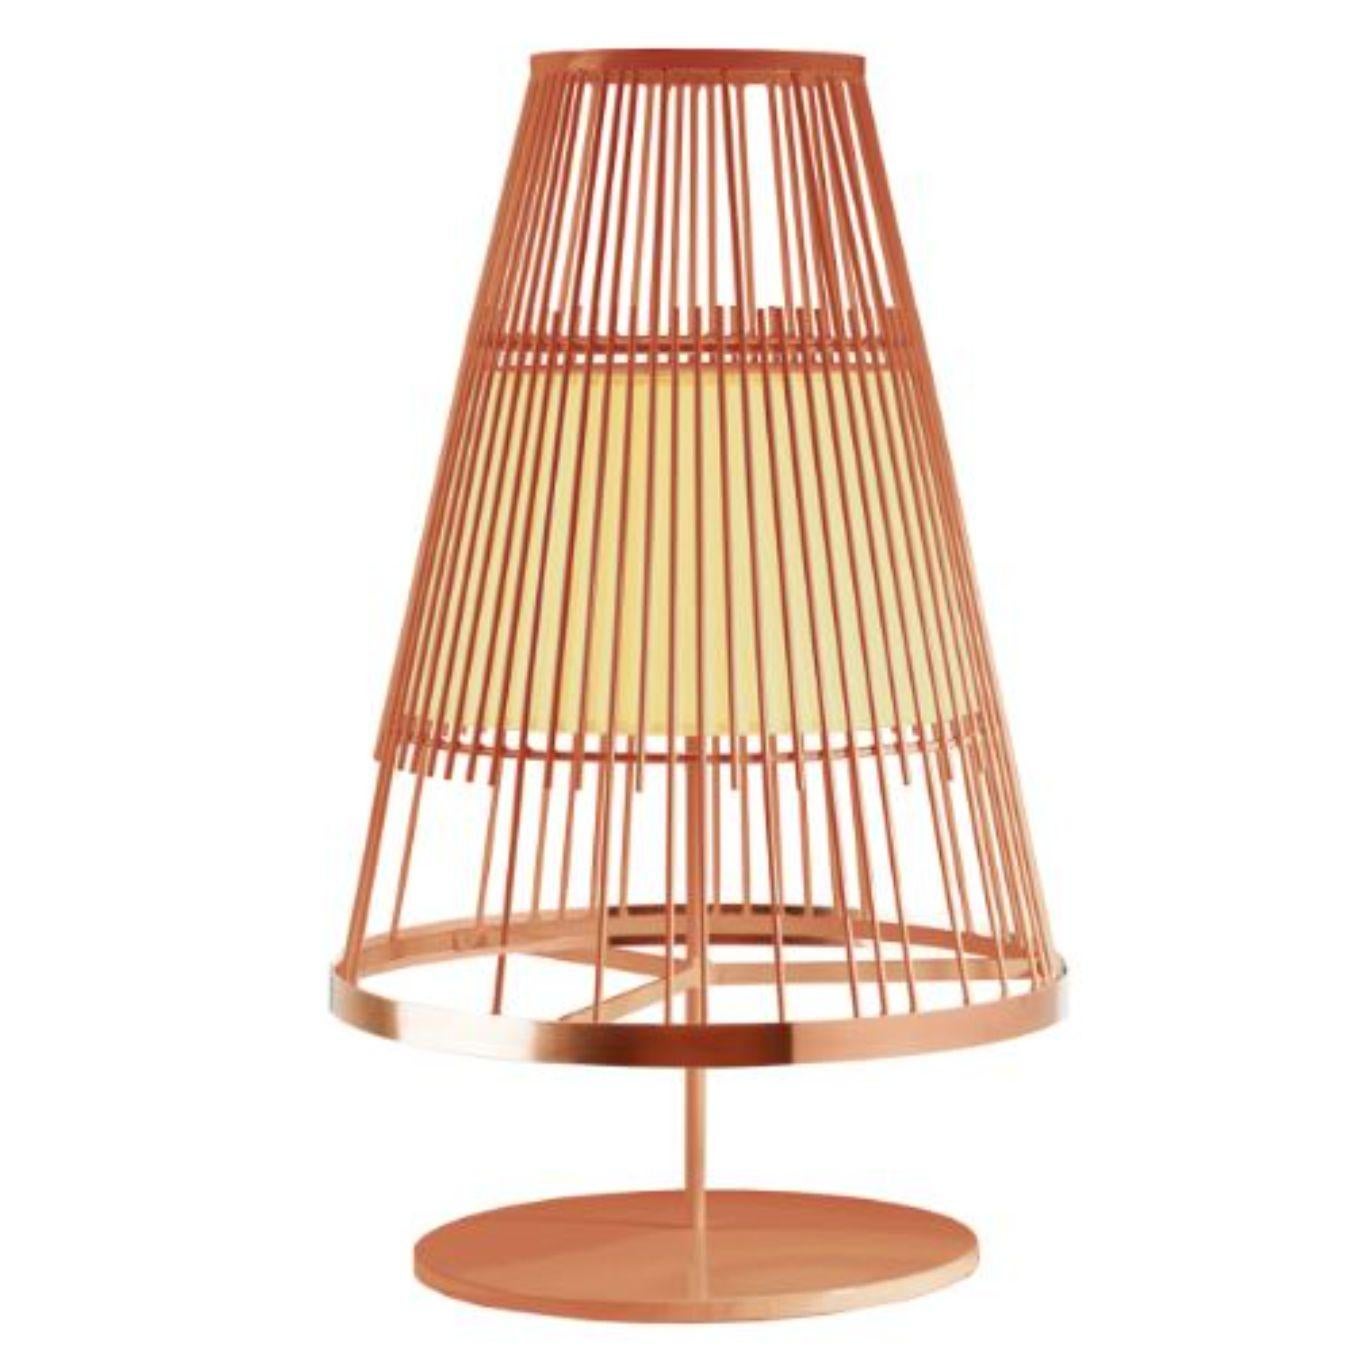 Salmon up table lamp with copper ring by Dooq
Dimensions: W 44 x D 44 x H 72 cm
Materials: lacquered metal, polished or brushed metal, copper.
abat-jour: cotton
Also available in different colors and materials.